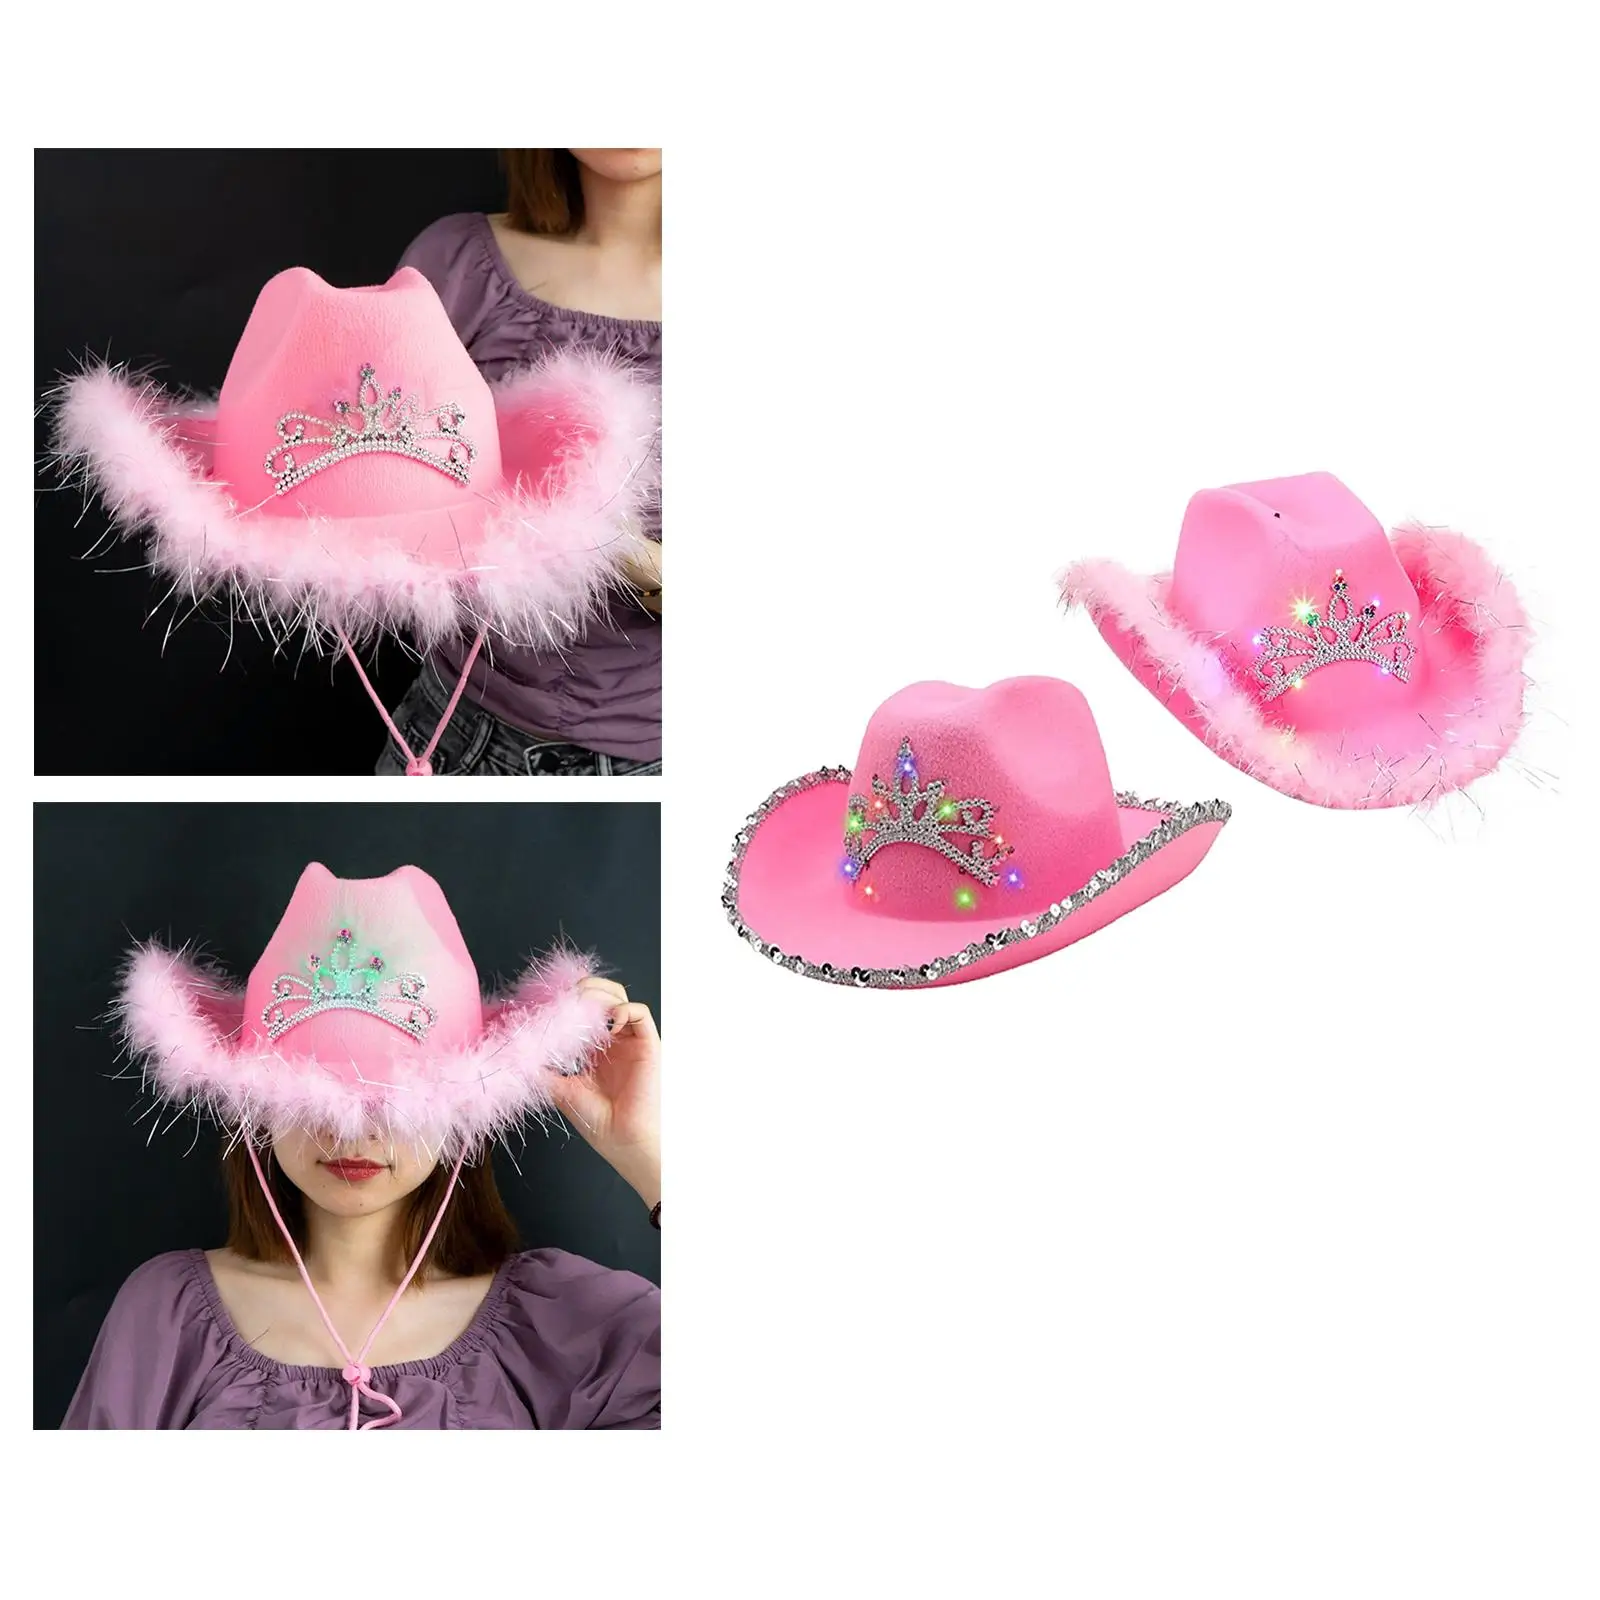  Cowgirl Hat Felt Hat with Crown Western Wide Brim for Women Girls Fancy Dress Party Costume